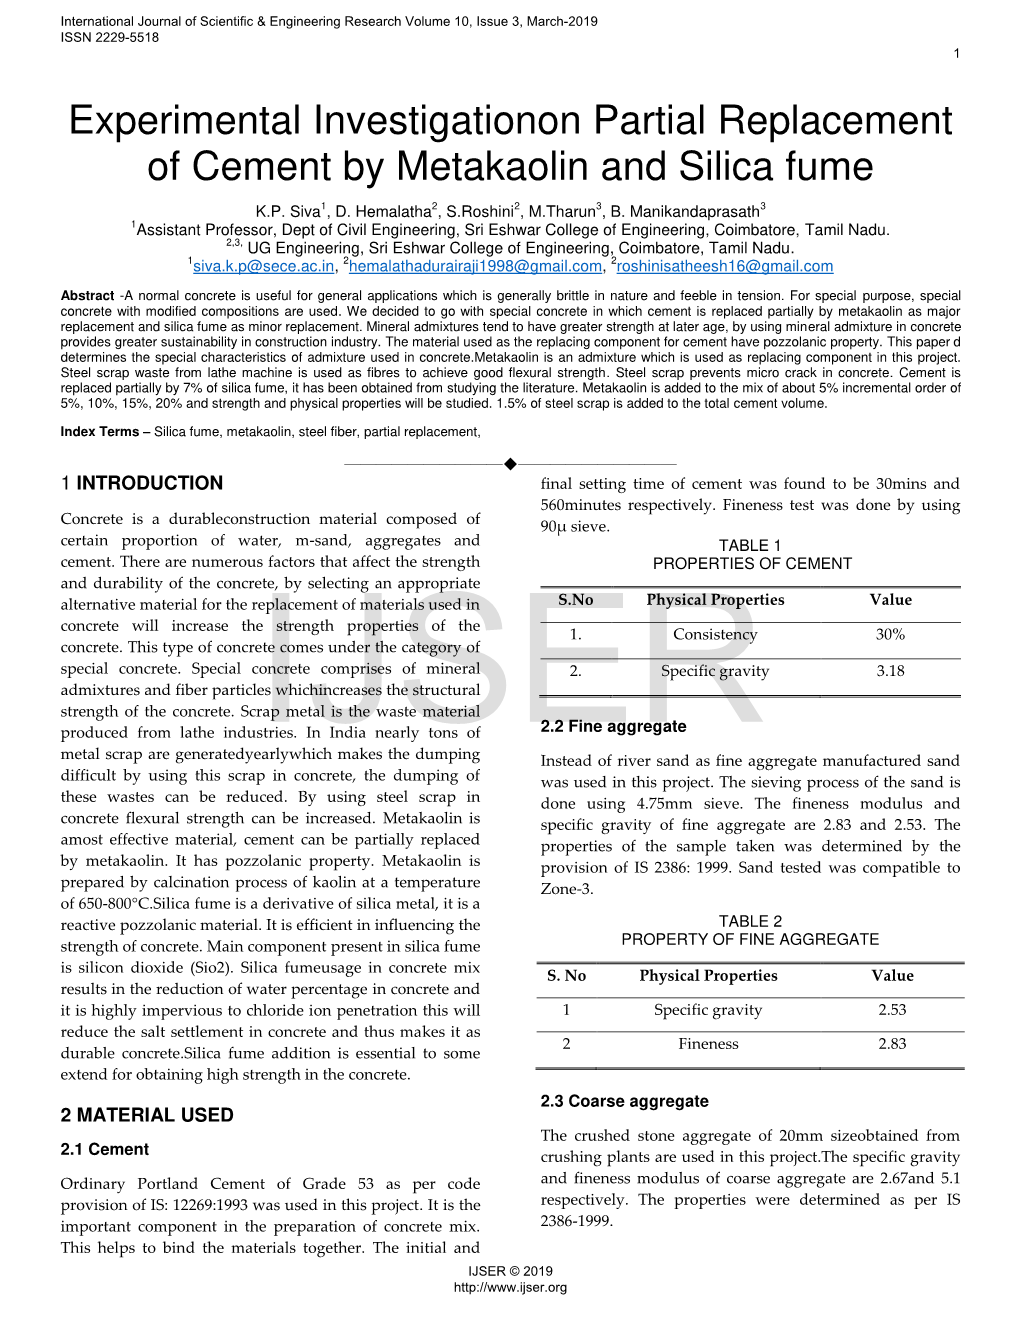 Experimental Investigationon Partial Replacement of Cement by Metakaolin and Silica Fume